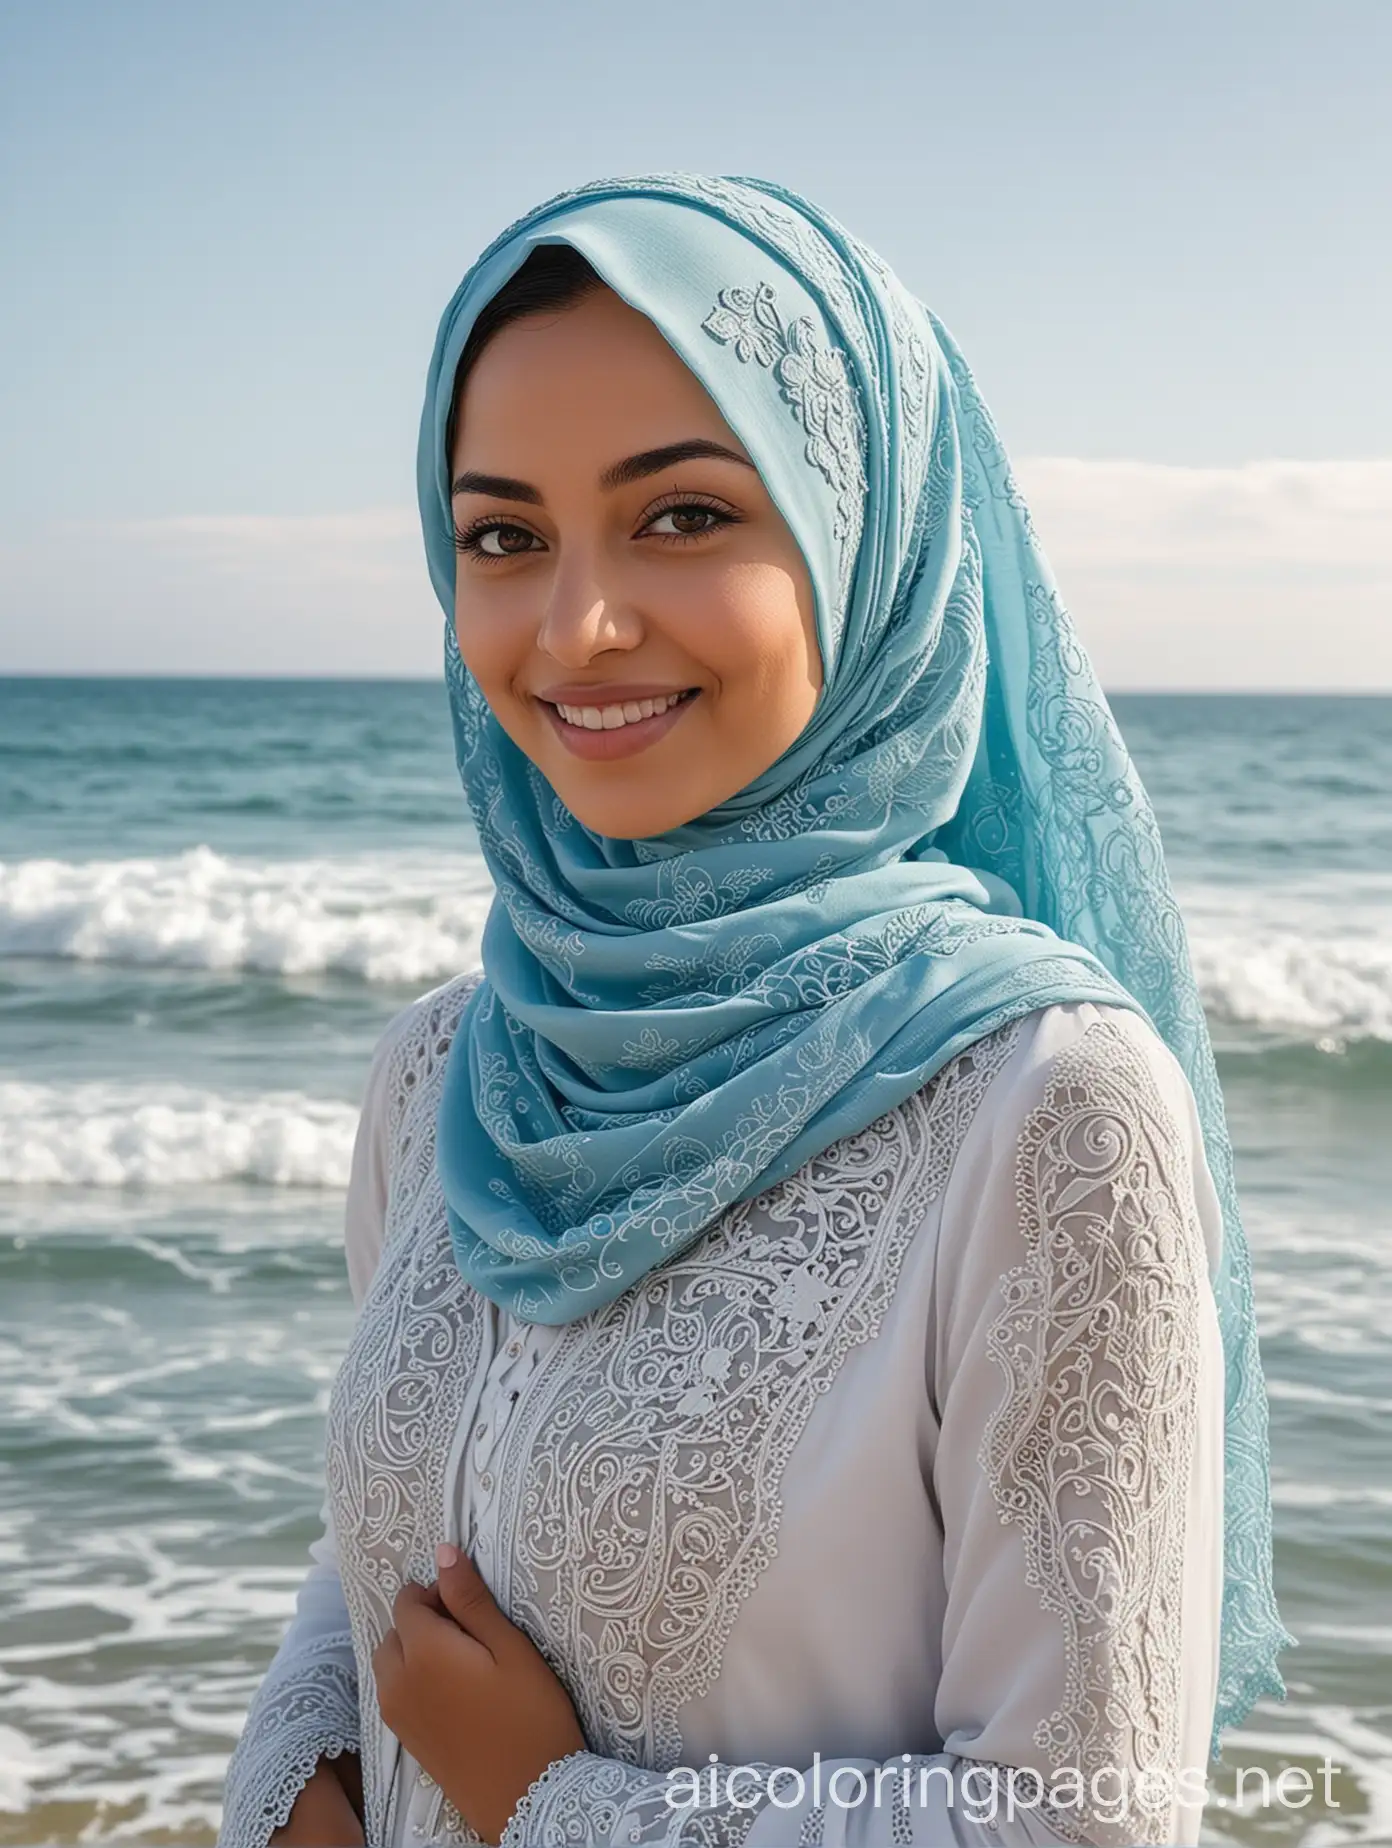 The image features a woman wearing a light blue hijab adorned with intricate embroidery. She is smiling and standing in front of a serene ocean backdrop, with gentle waves visible in the background. The fabric of her hijab is flowing softly in the wind, adding a sense of movement to the scene.  Watermark: Ahmed, Coloring Page, black and white, line art, white background, Simplicity, Ample White Space. The background of the coloring page is plain white to make it easy for young children to color within the lines. The outlines of all the subjects are easy to distinguish, making it simple for kids to color without too much difficulty